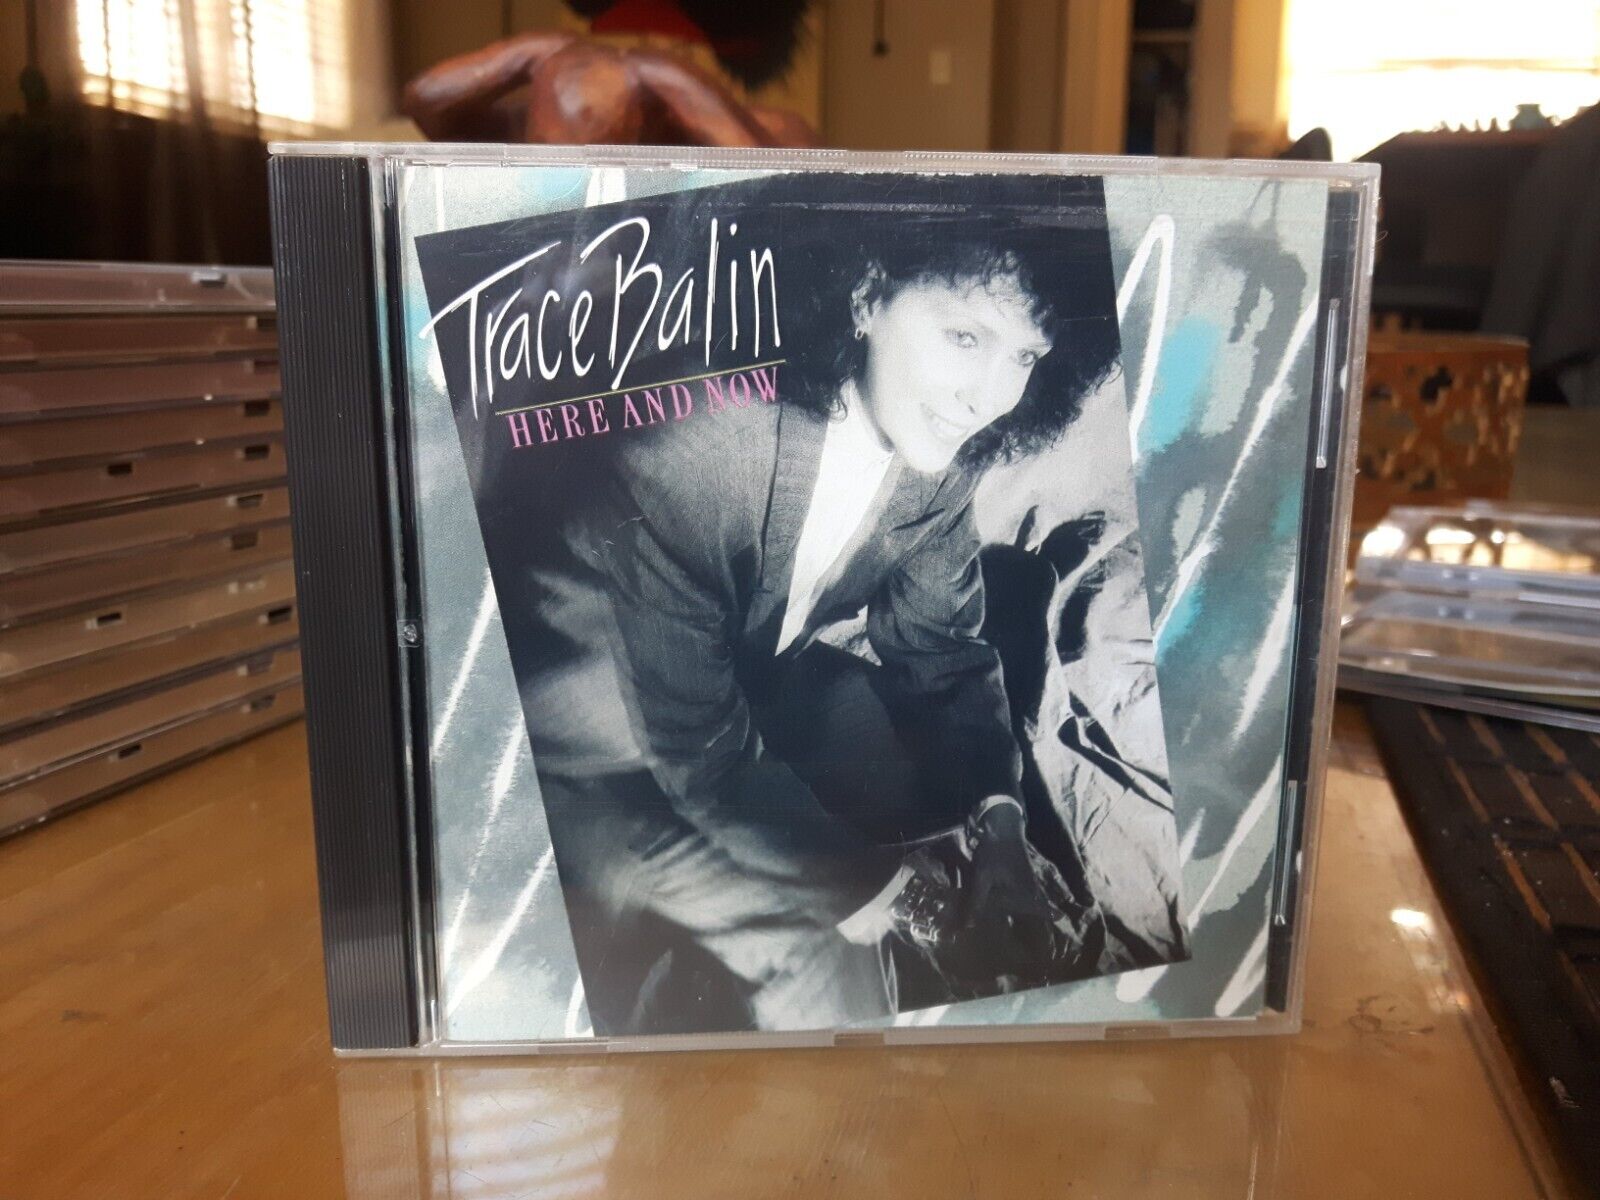 Trace Balin - Here and Now. 1989. USA. Excellent Condition RARE OOP NM